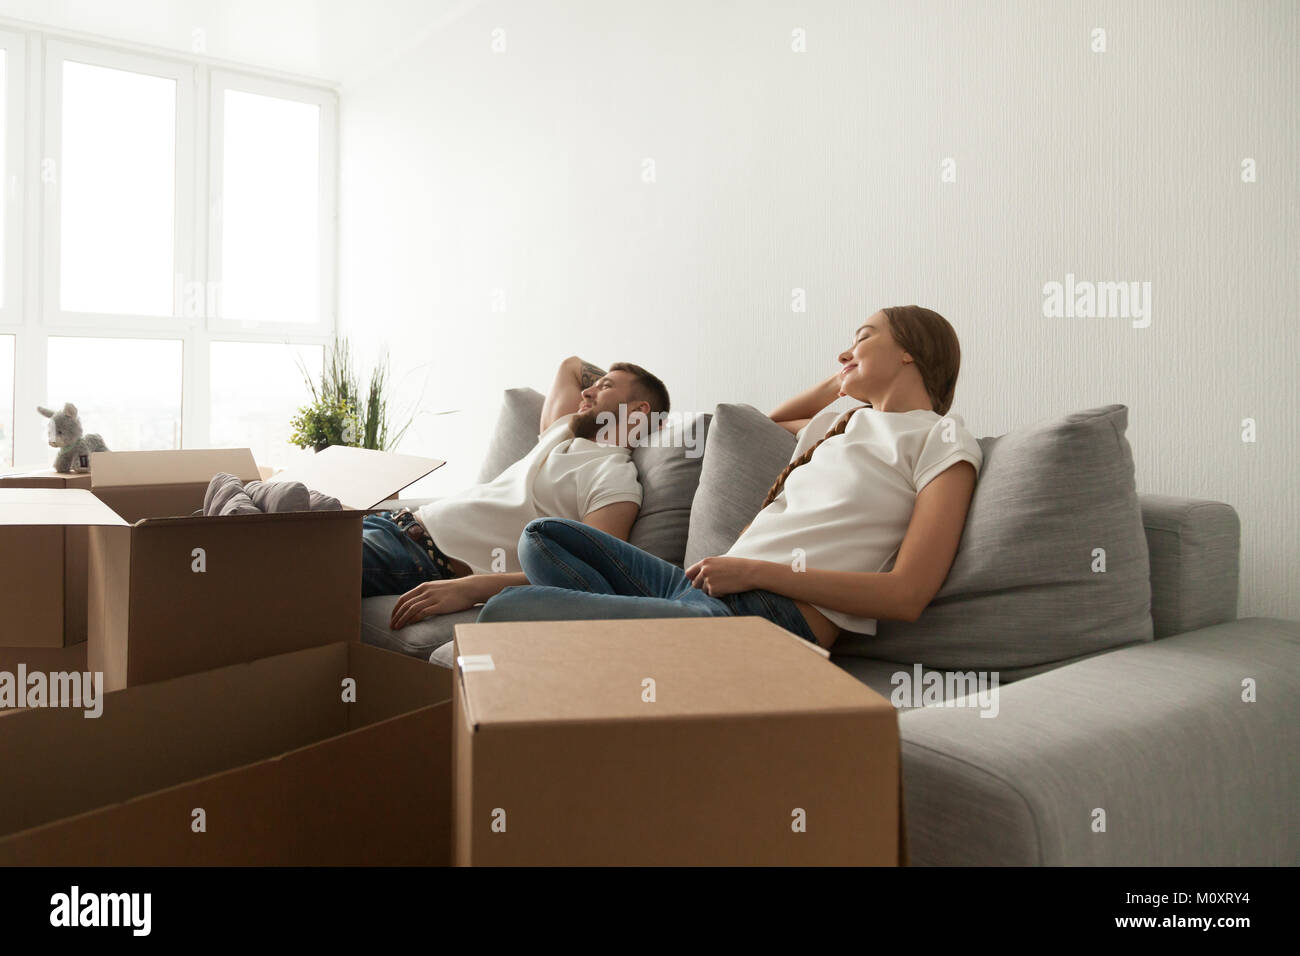 Young couple relaxing on couch just moved into new home Stock Photo